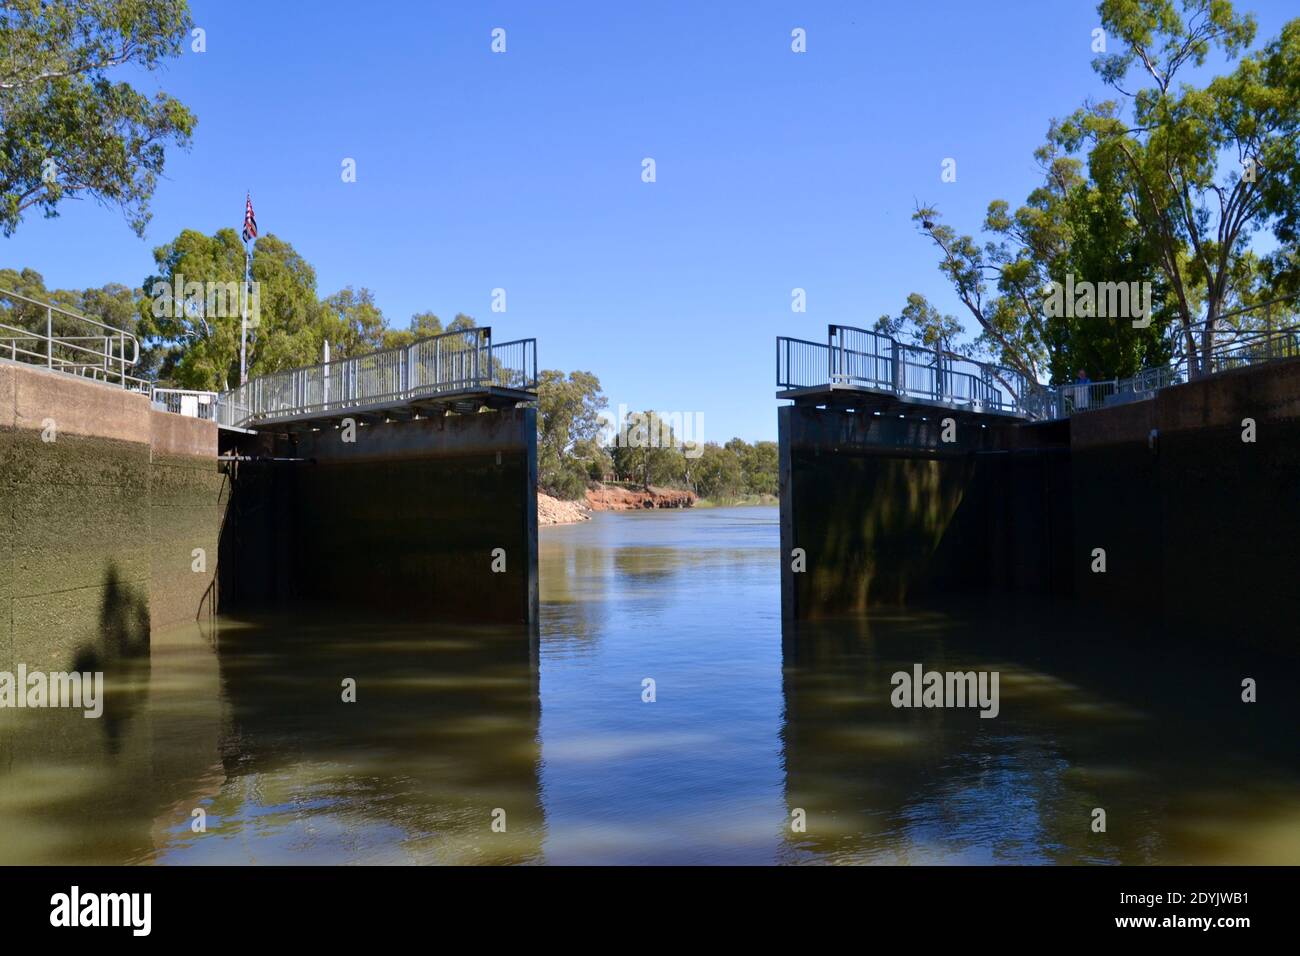 Large mechanical hydraulic gates of Lock 11 on the Murray River in Mildura opening to let boats through to the lower level at the Mildura weir Stock Photo